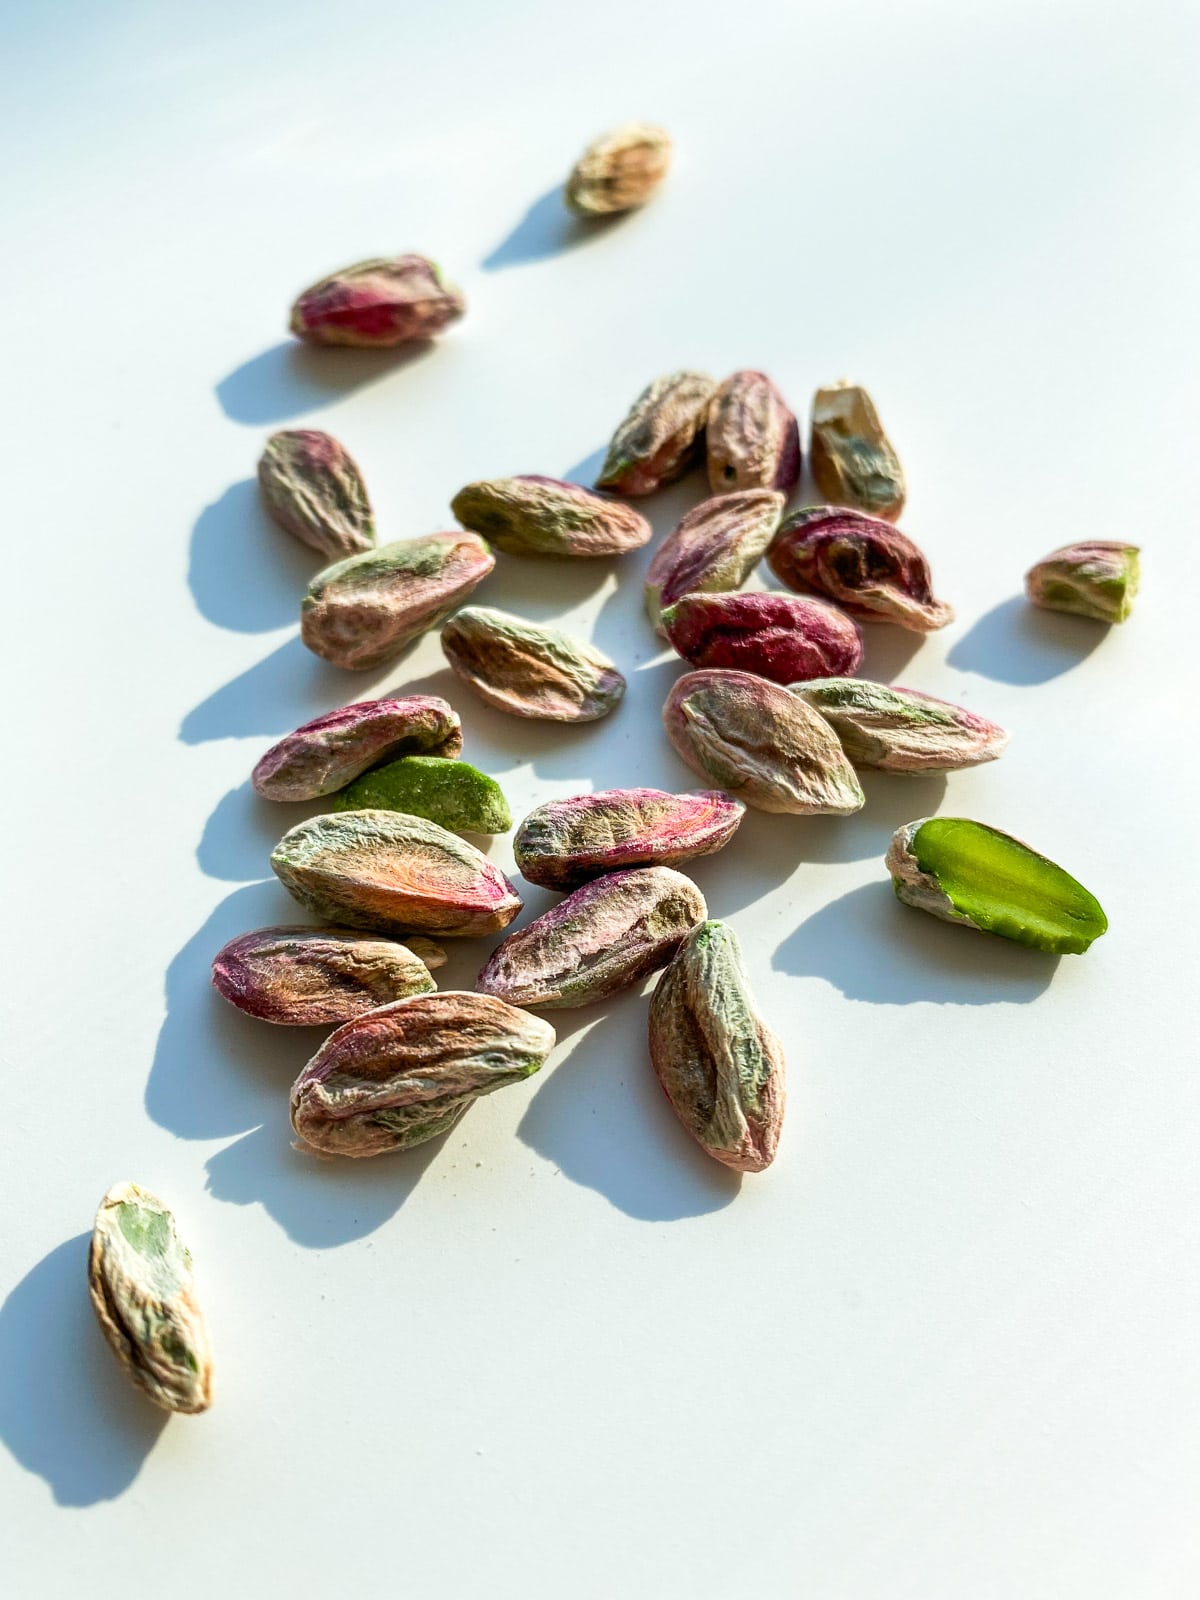 A close up image of shelled pistachios on a white counter top.